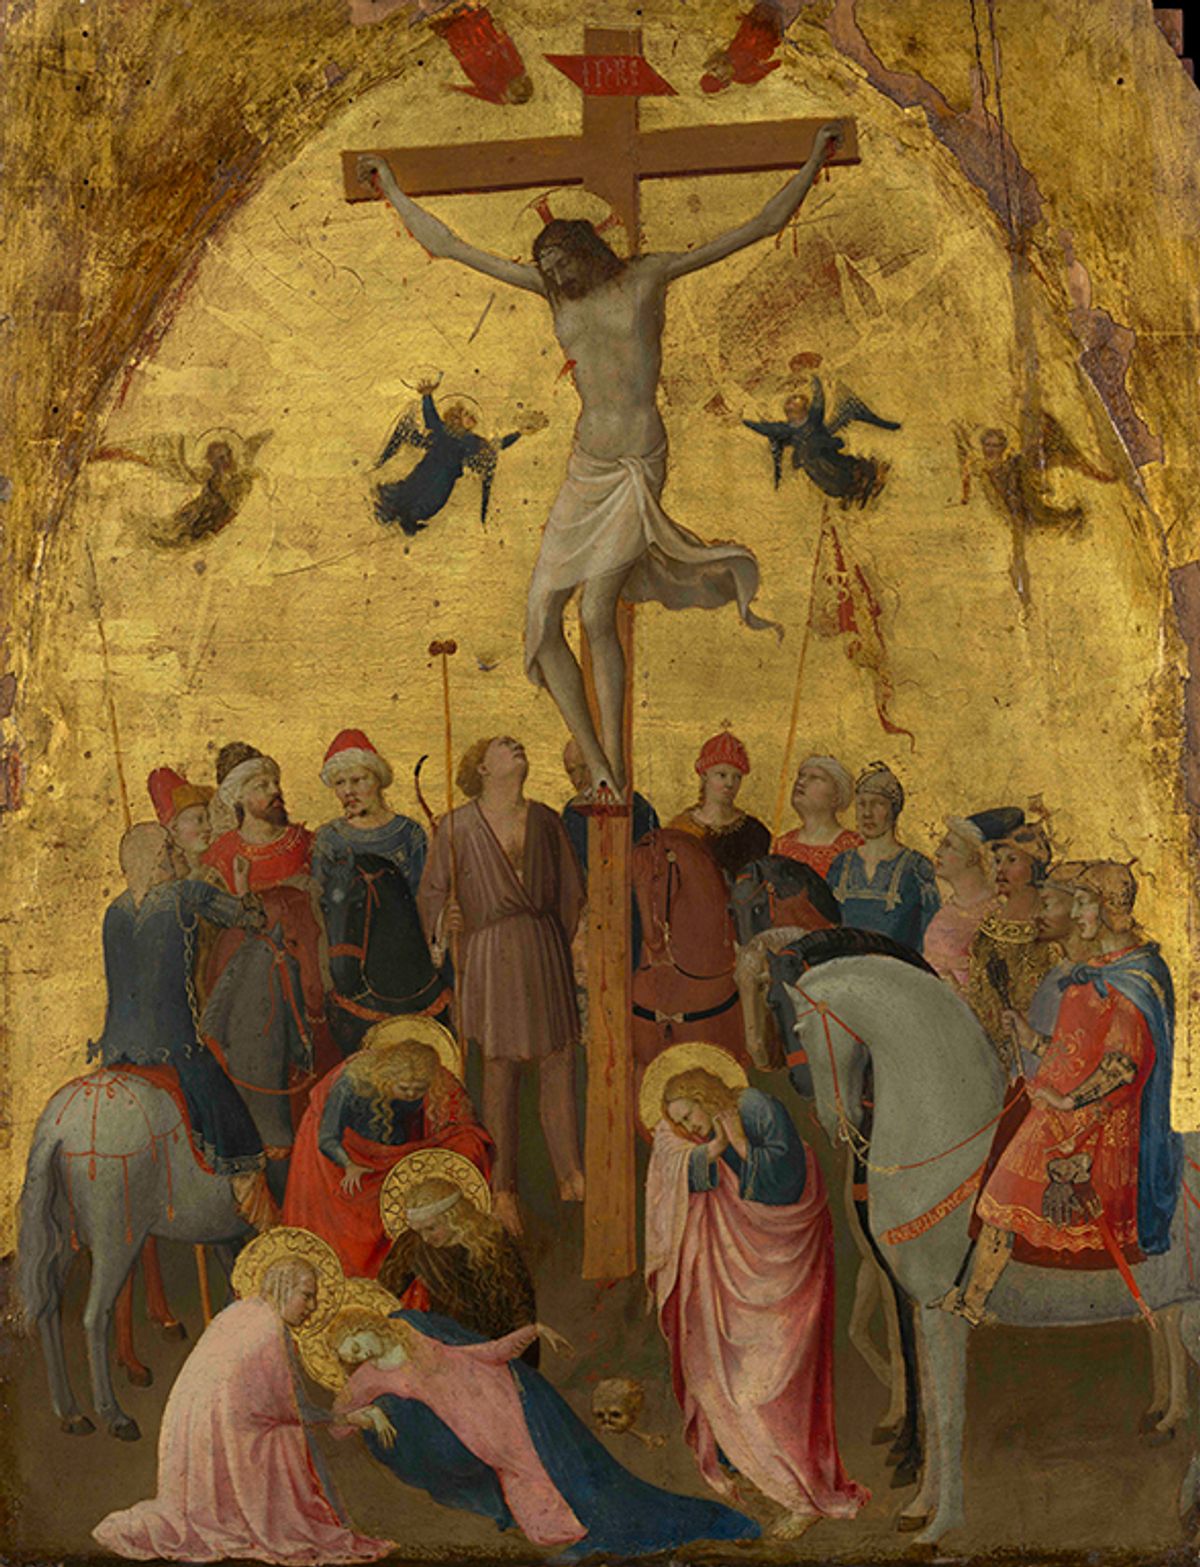 Fra Angelico's The Crucifixion (around 1420-23), part of a loan exhibition planned at the Gallery of Modern Art in Brisbane Metropolitan Museum of Art